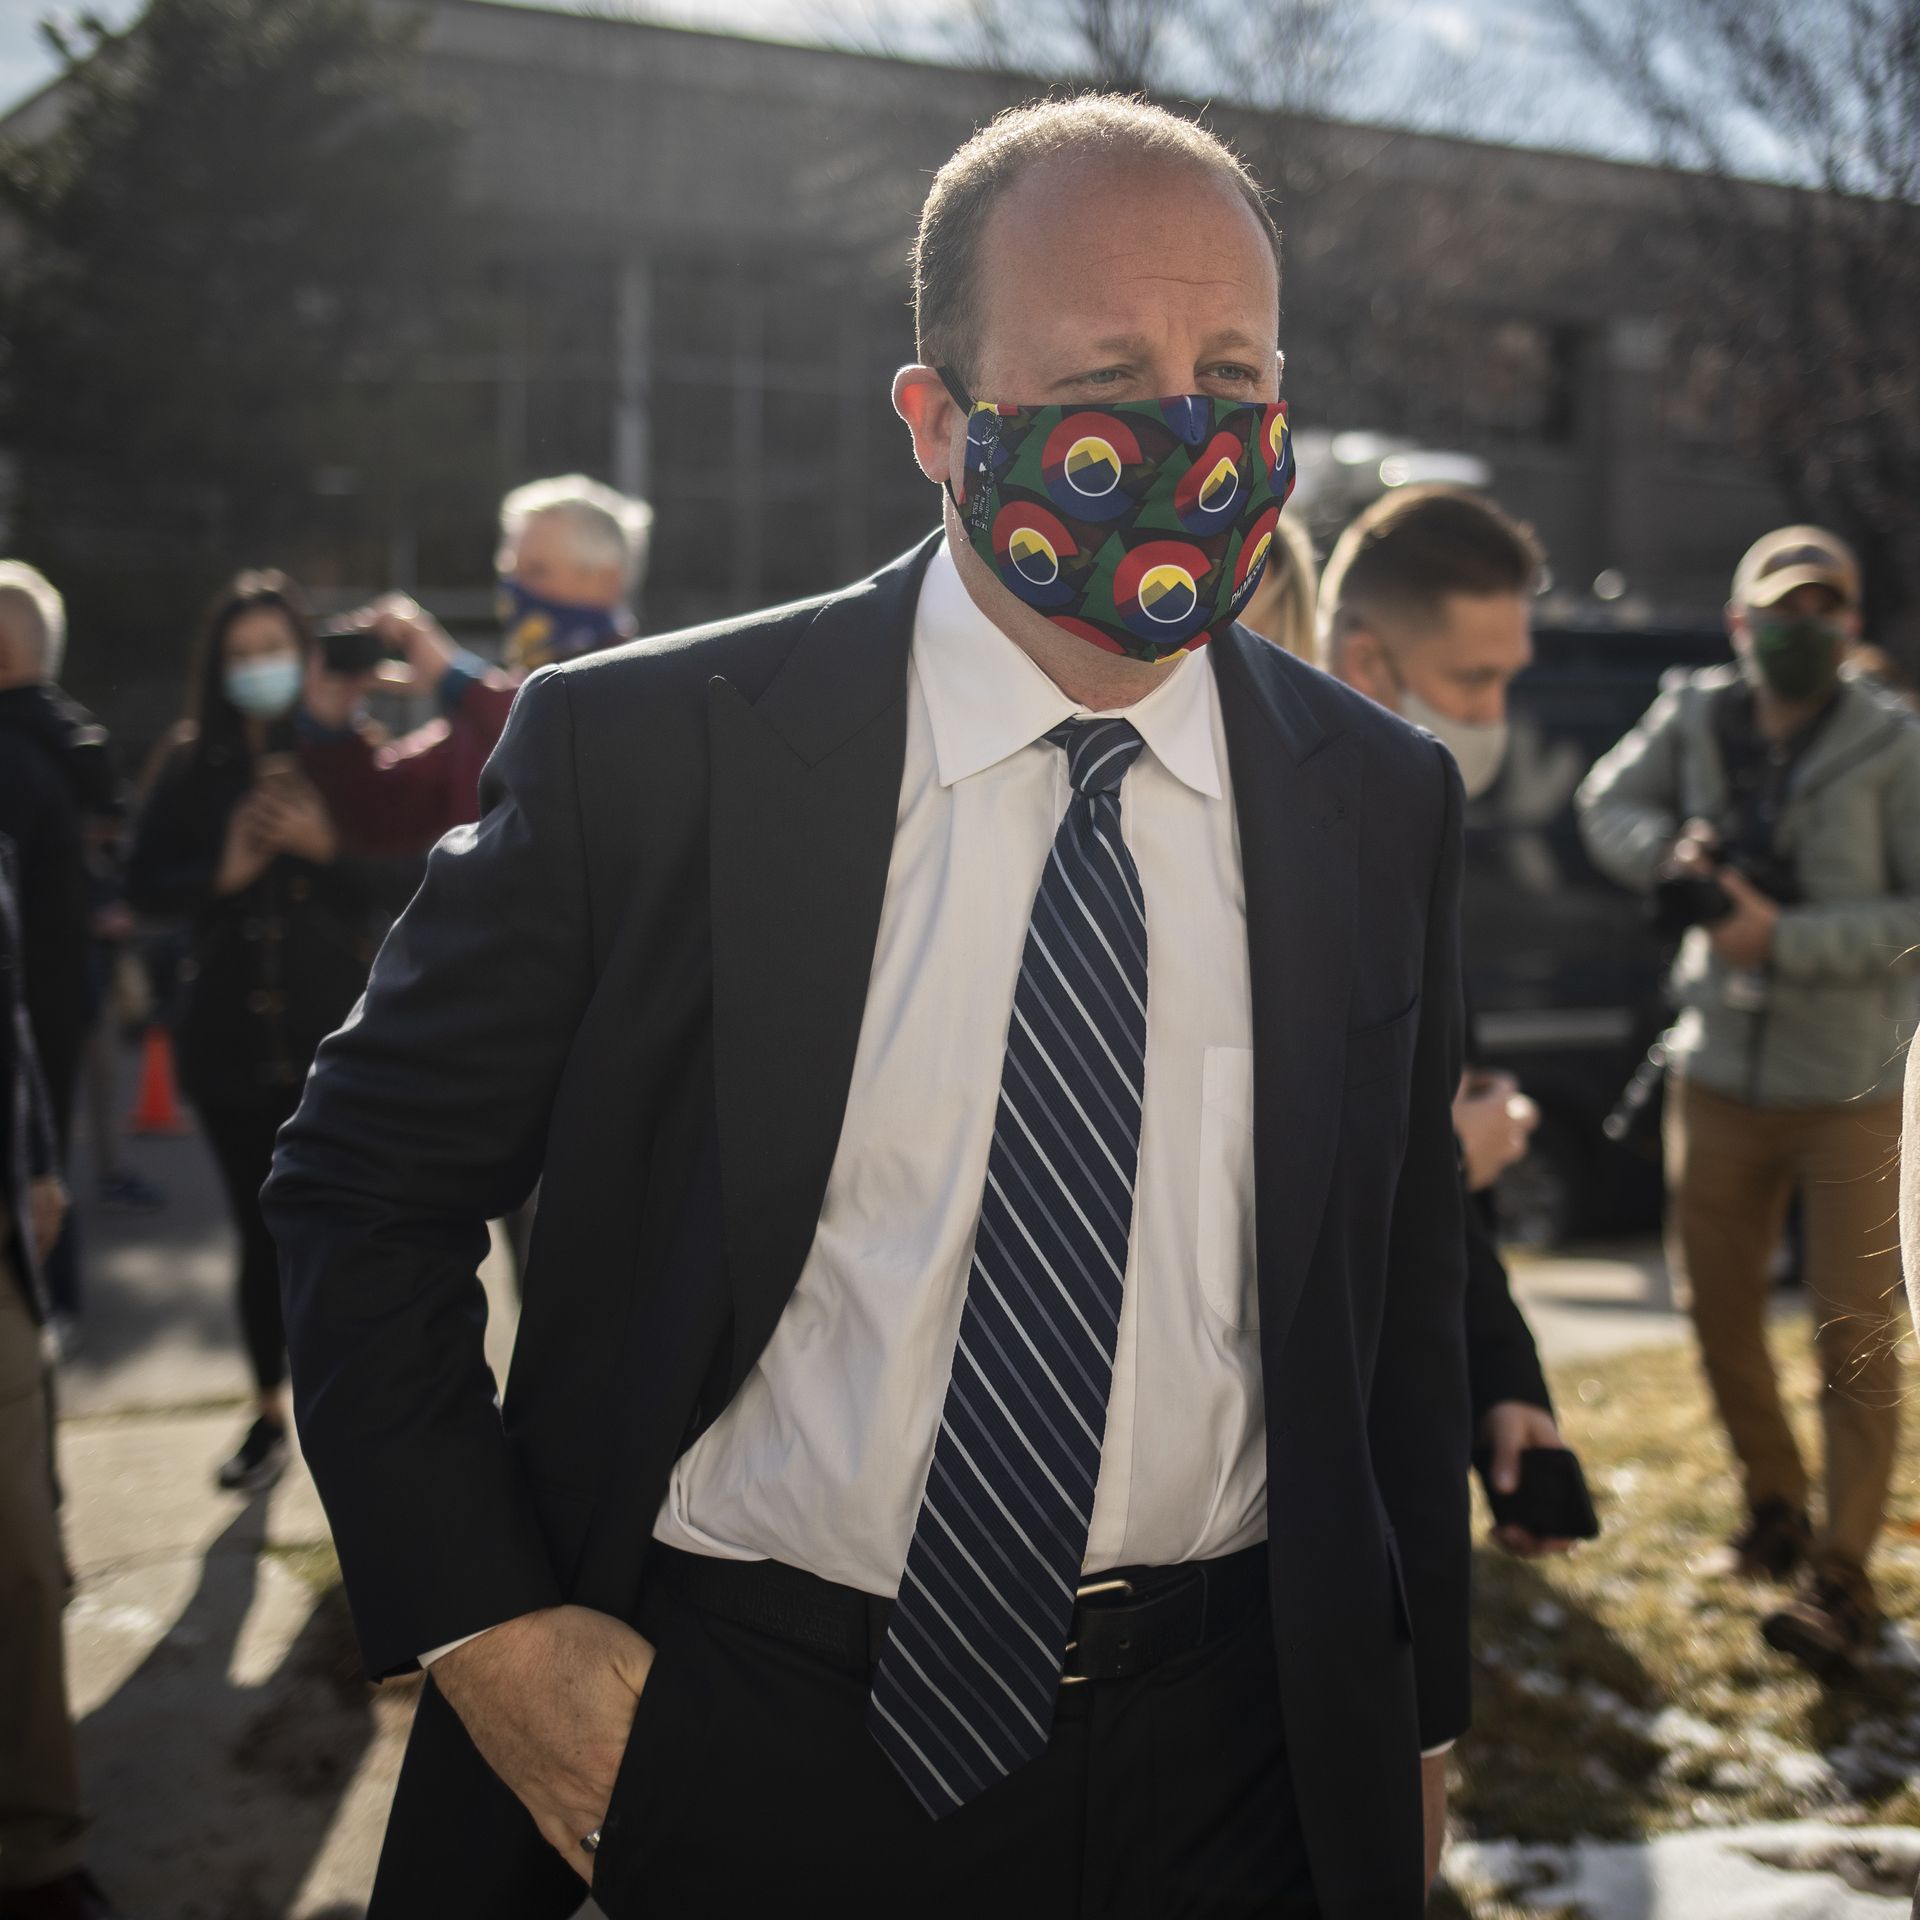  Colorado Governor Jared Polis leaves a press conference the morning after a gunman opened fire at a King Sooper's grocery store on March 23, 2021 in Boulder, Colorado. 